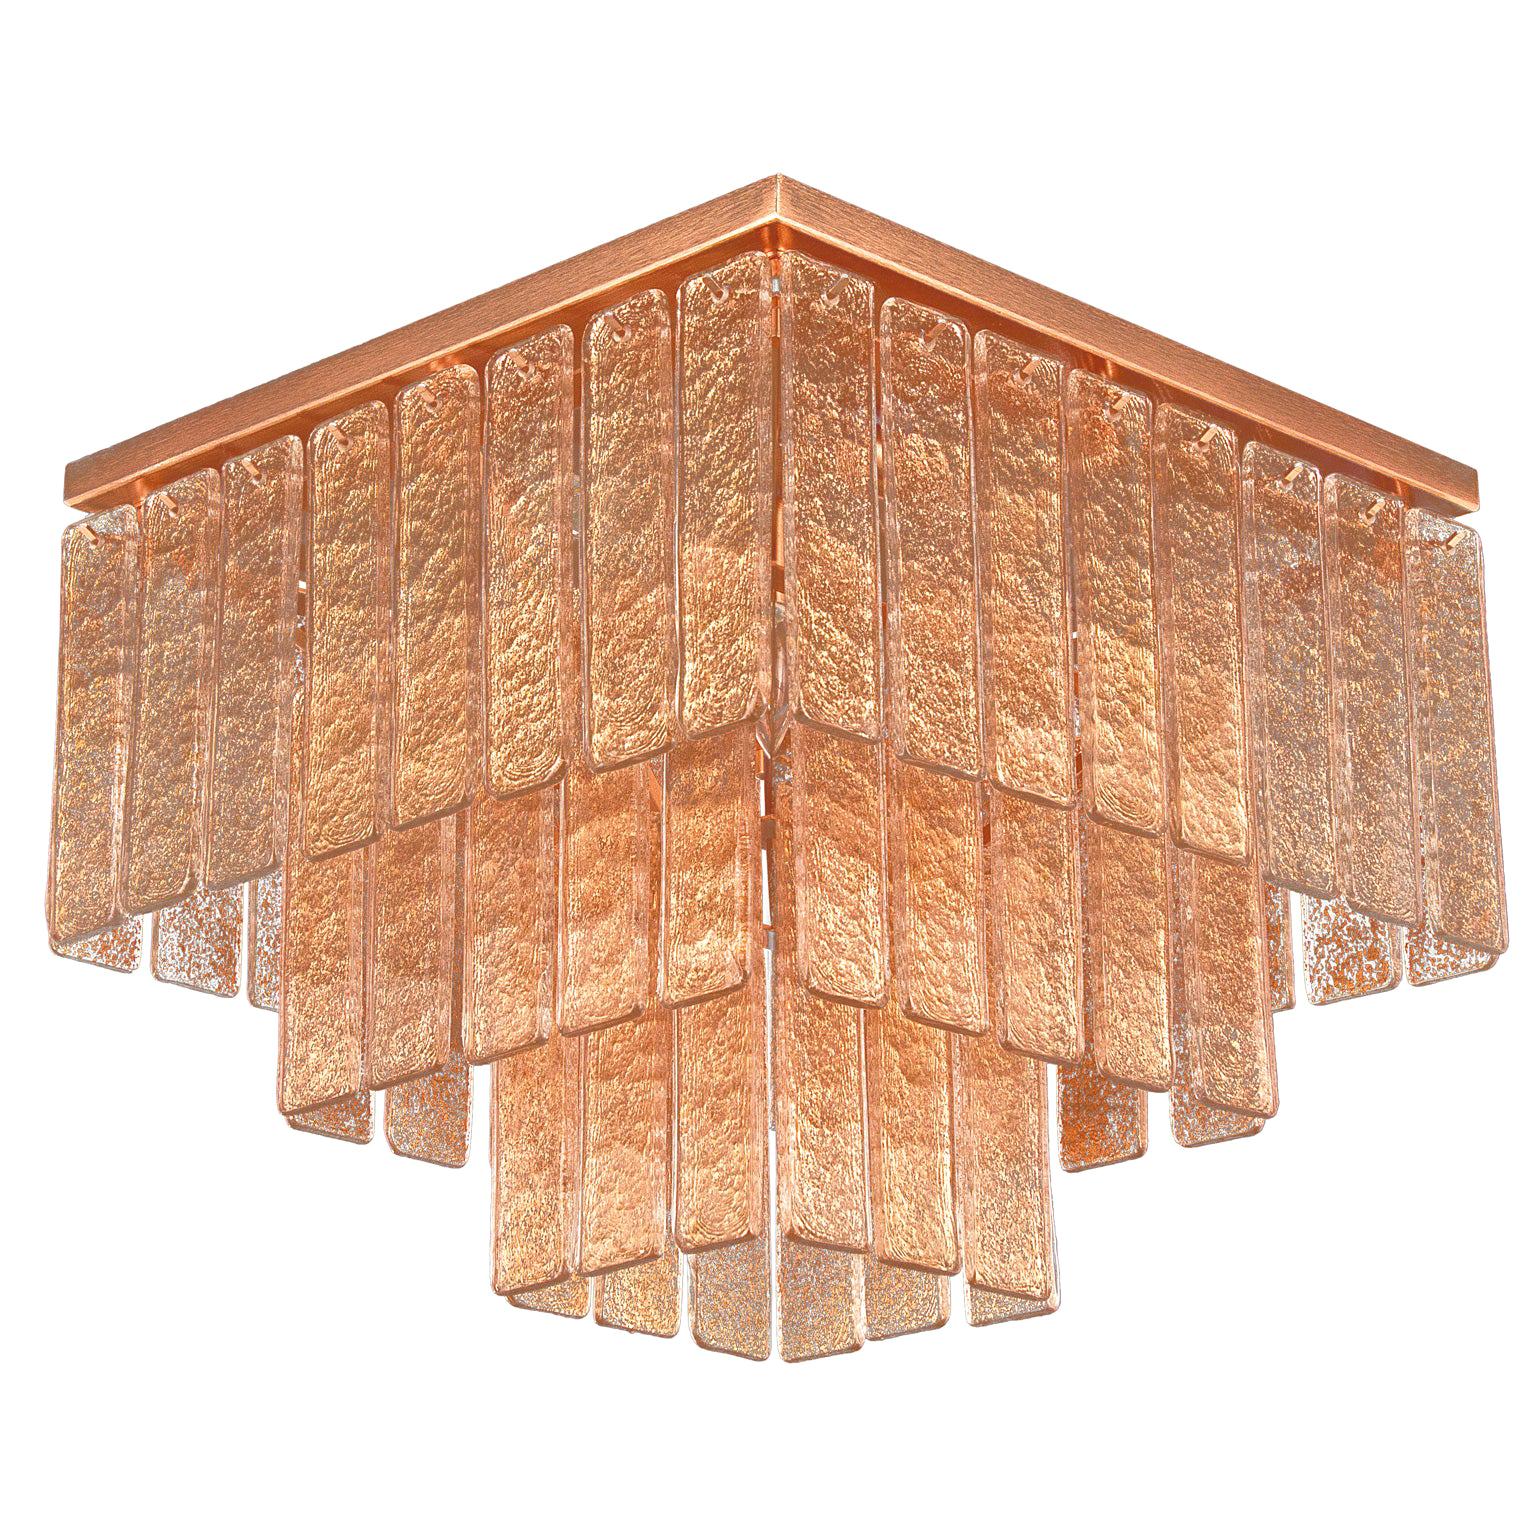 Ceiling Light Copper Glass Listels Copper Fixture Charleston by Multiforme